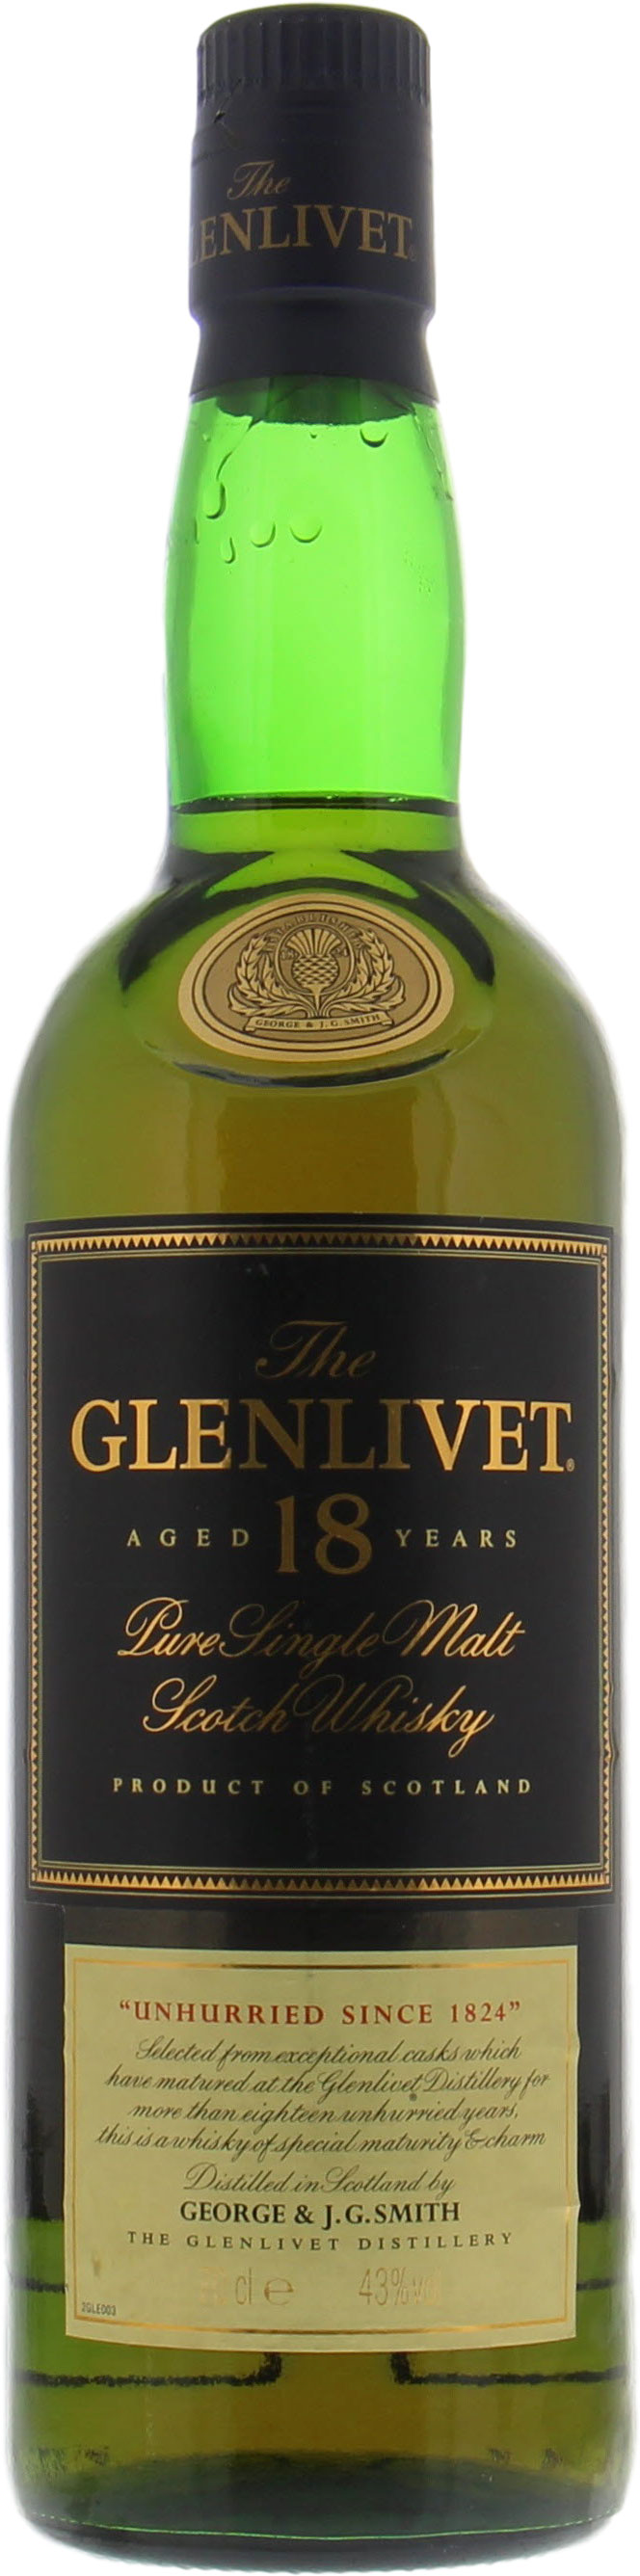 Glenlivet - 18 Years Old two-part label unhurried since 1824 43% NV